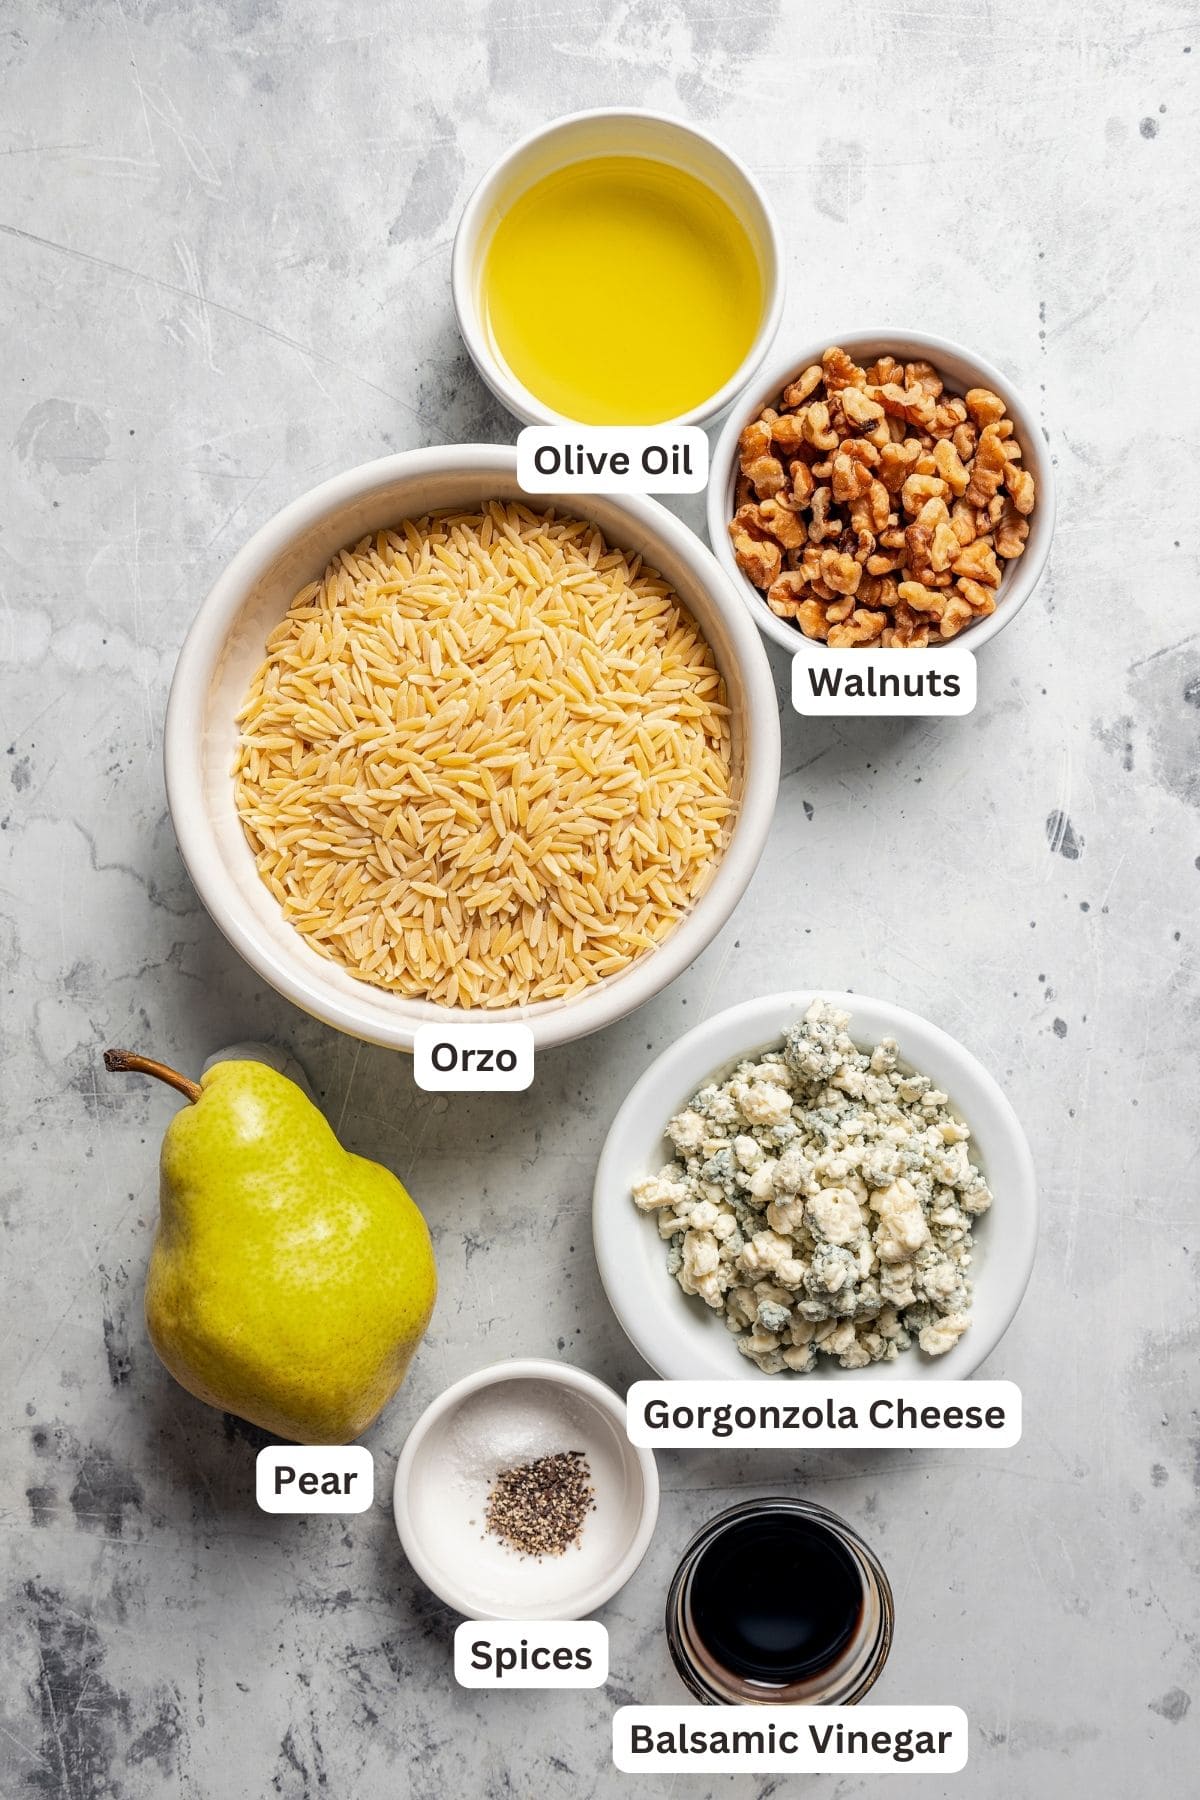 Ingredients for orzo salad with pears, walnuts, and gorgonzola cheese with text labels overlaying each ingredient.